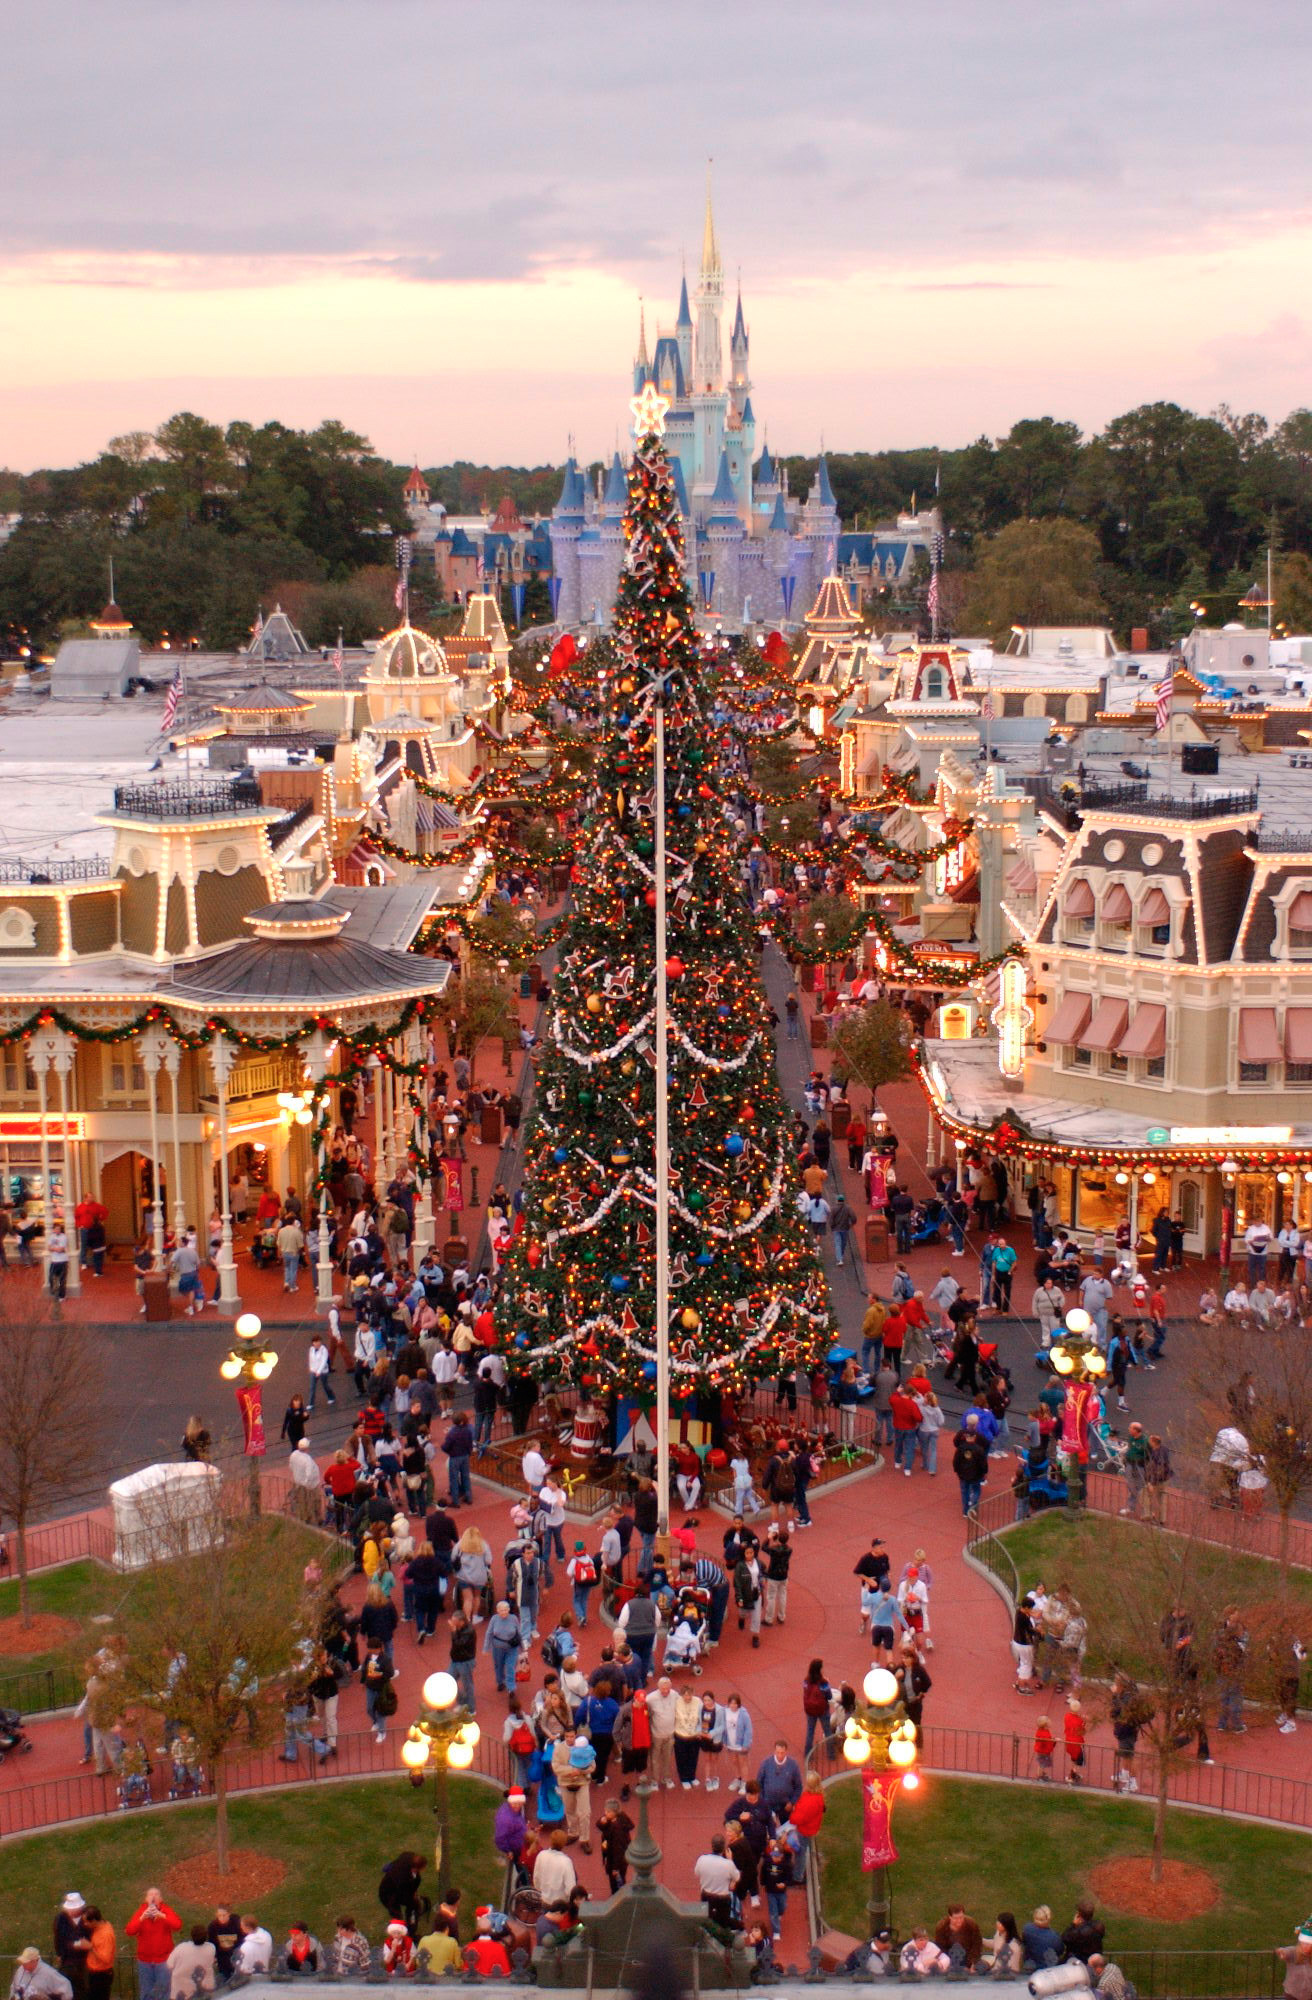 ResortLoop.com Episode 161 – Christmas at WDW with only a Very Merry Christmas Party Ticket